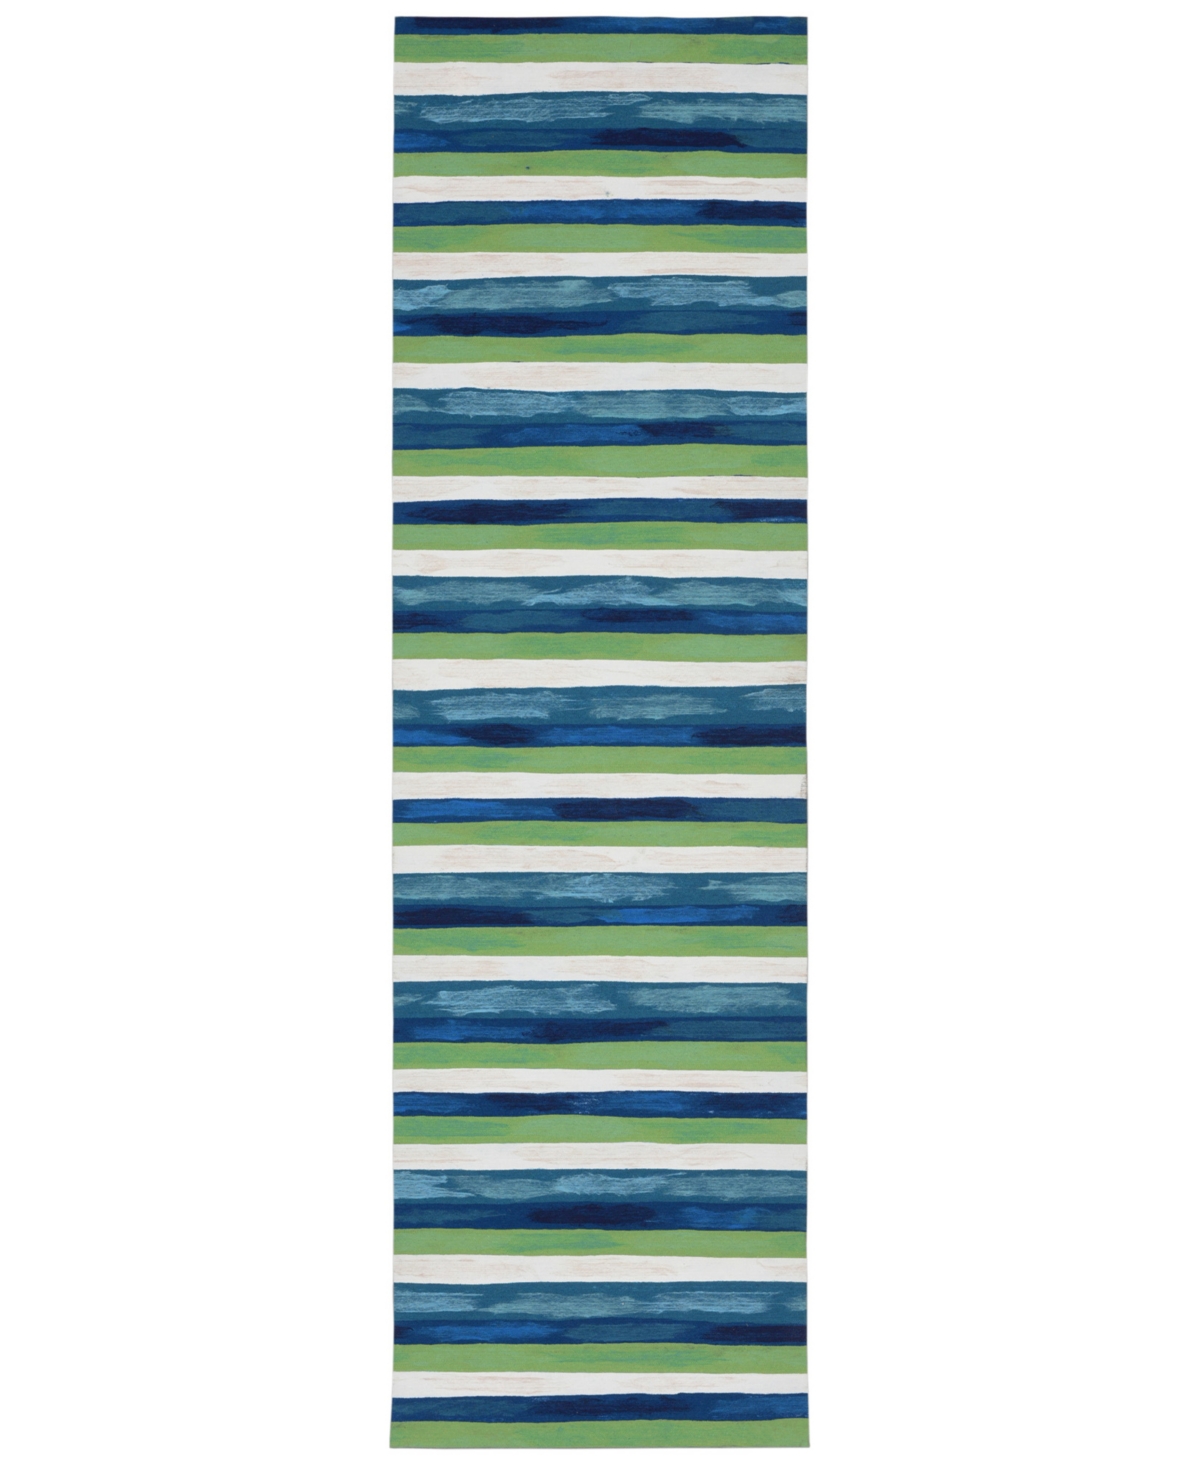 Liora Manne' Visions Ii Painted Stripes 2'3in x 8' Runner Outdoor Area Rug - Sapphire